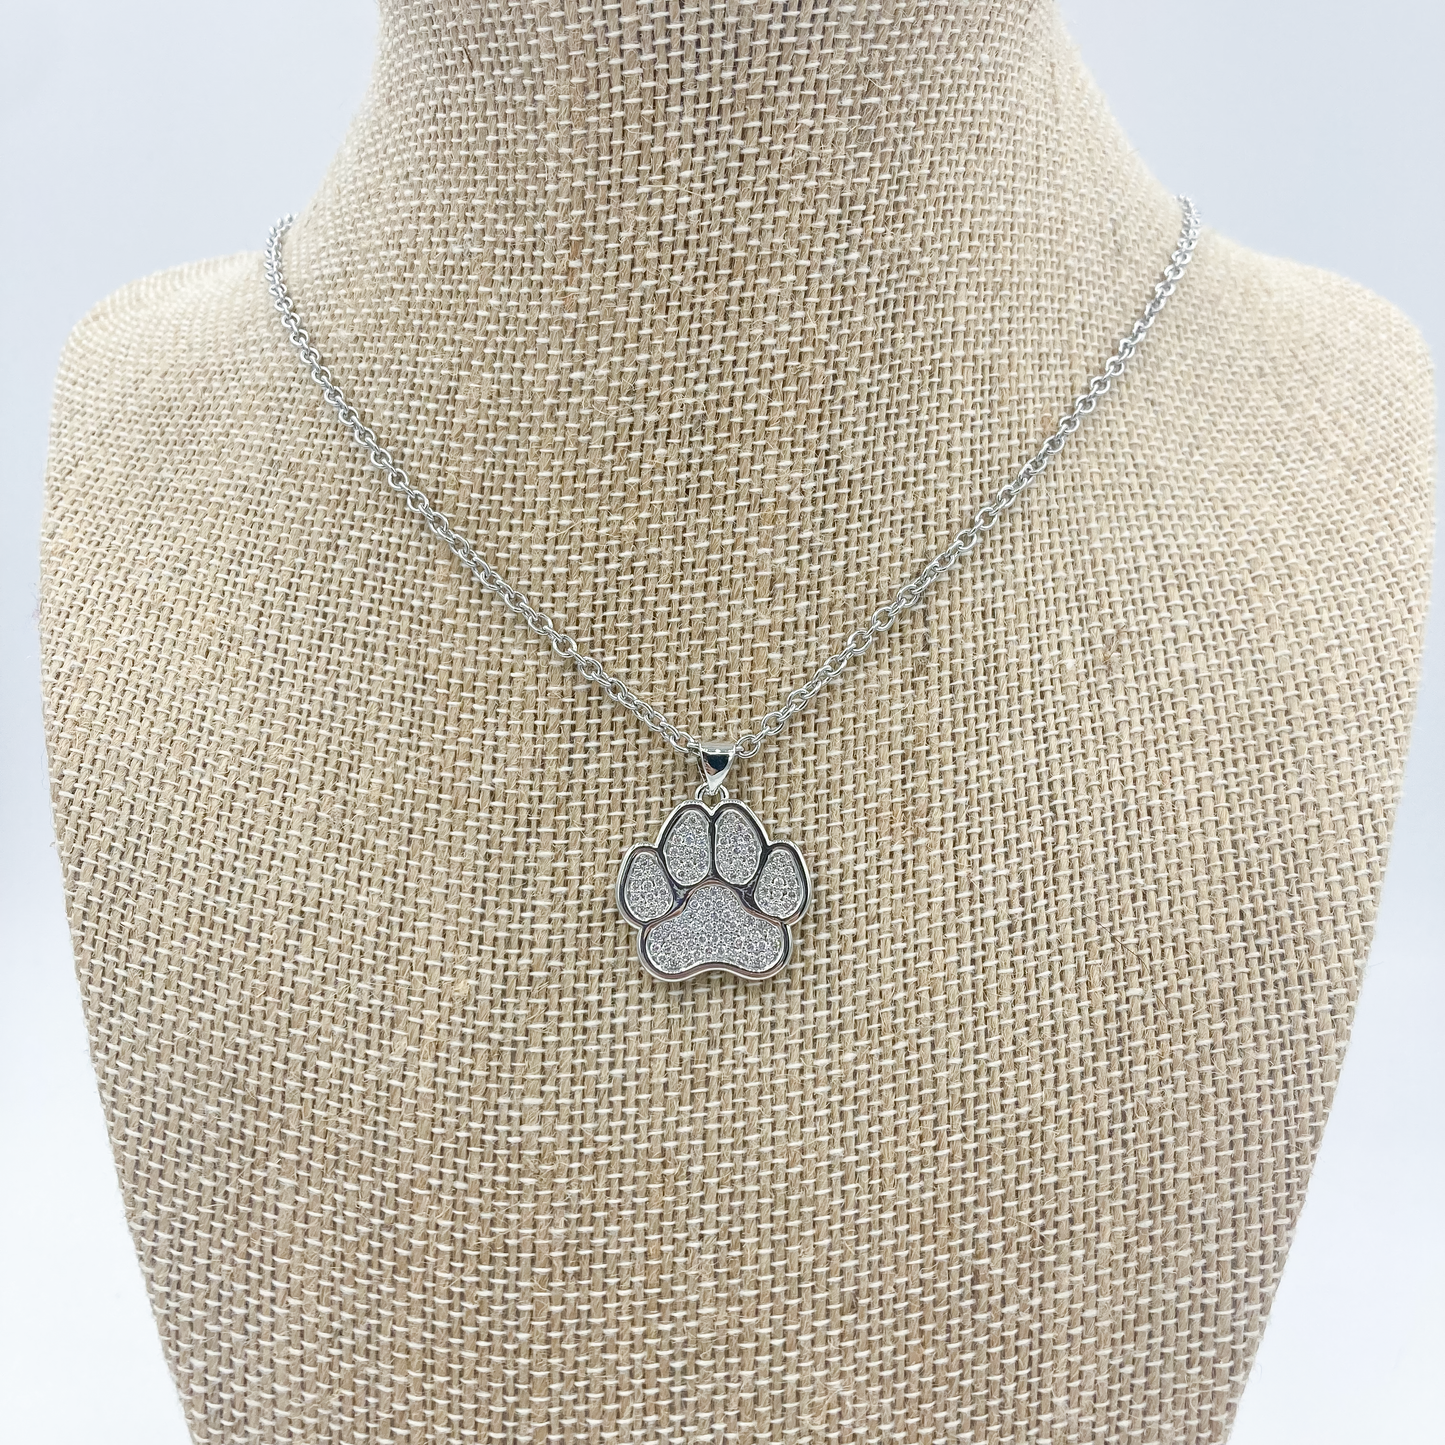 SILVER CRYSTAL PAW ON STAINLESS STEEL CHAIN 16"